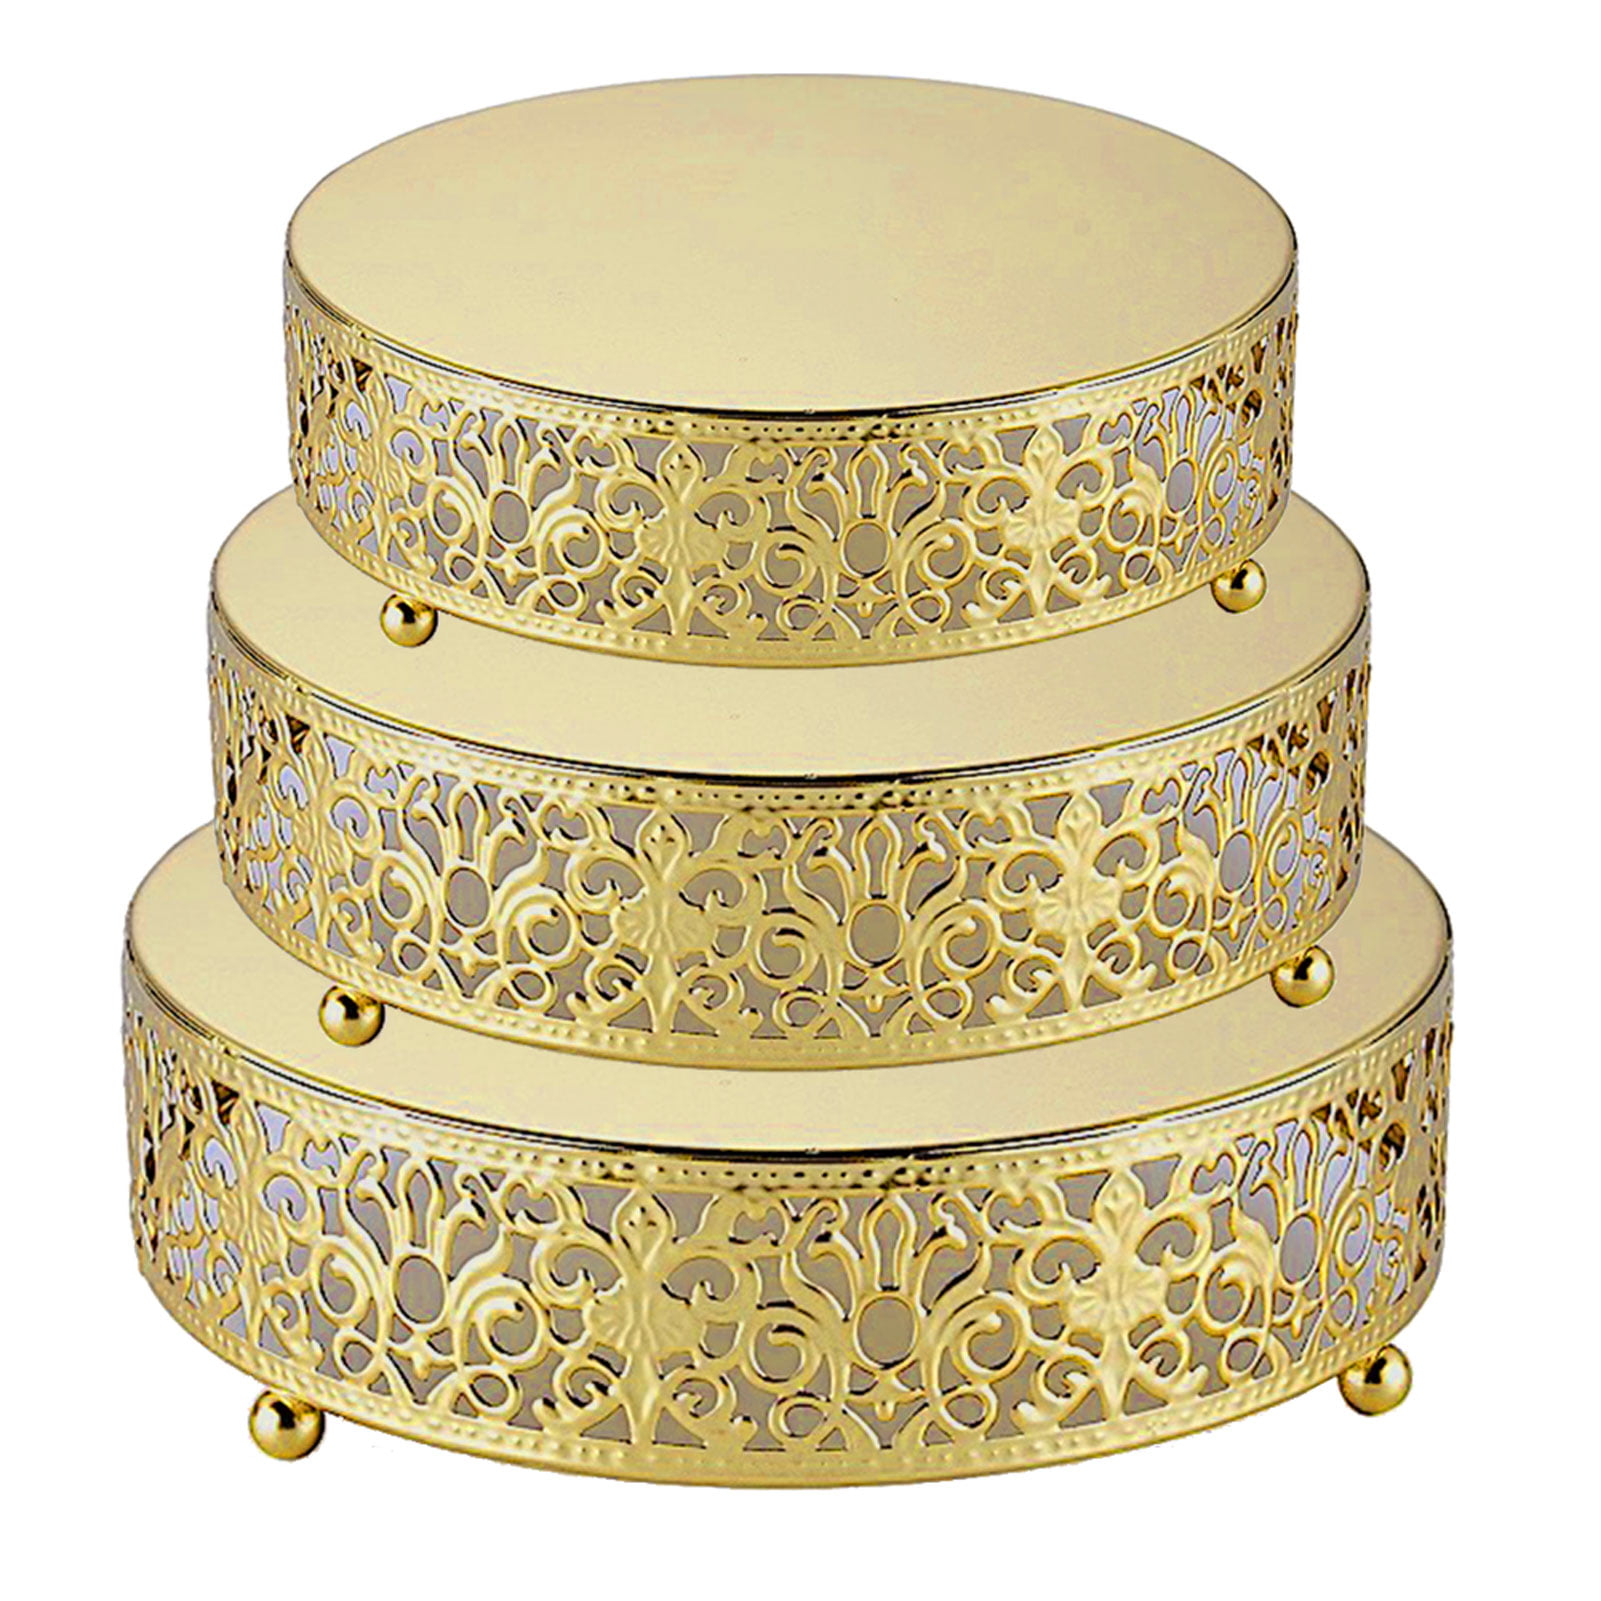 8cm Round Cake Stand Tray Home Wedding Party Cupcake Display Holder